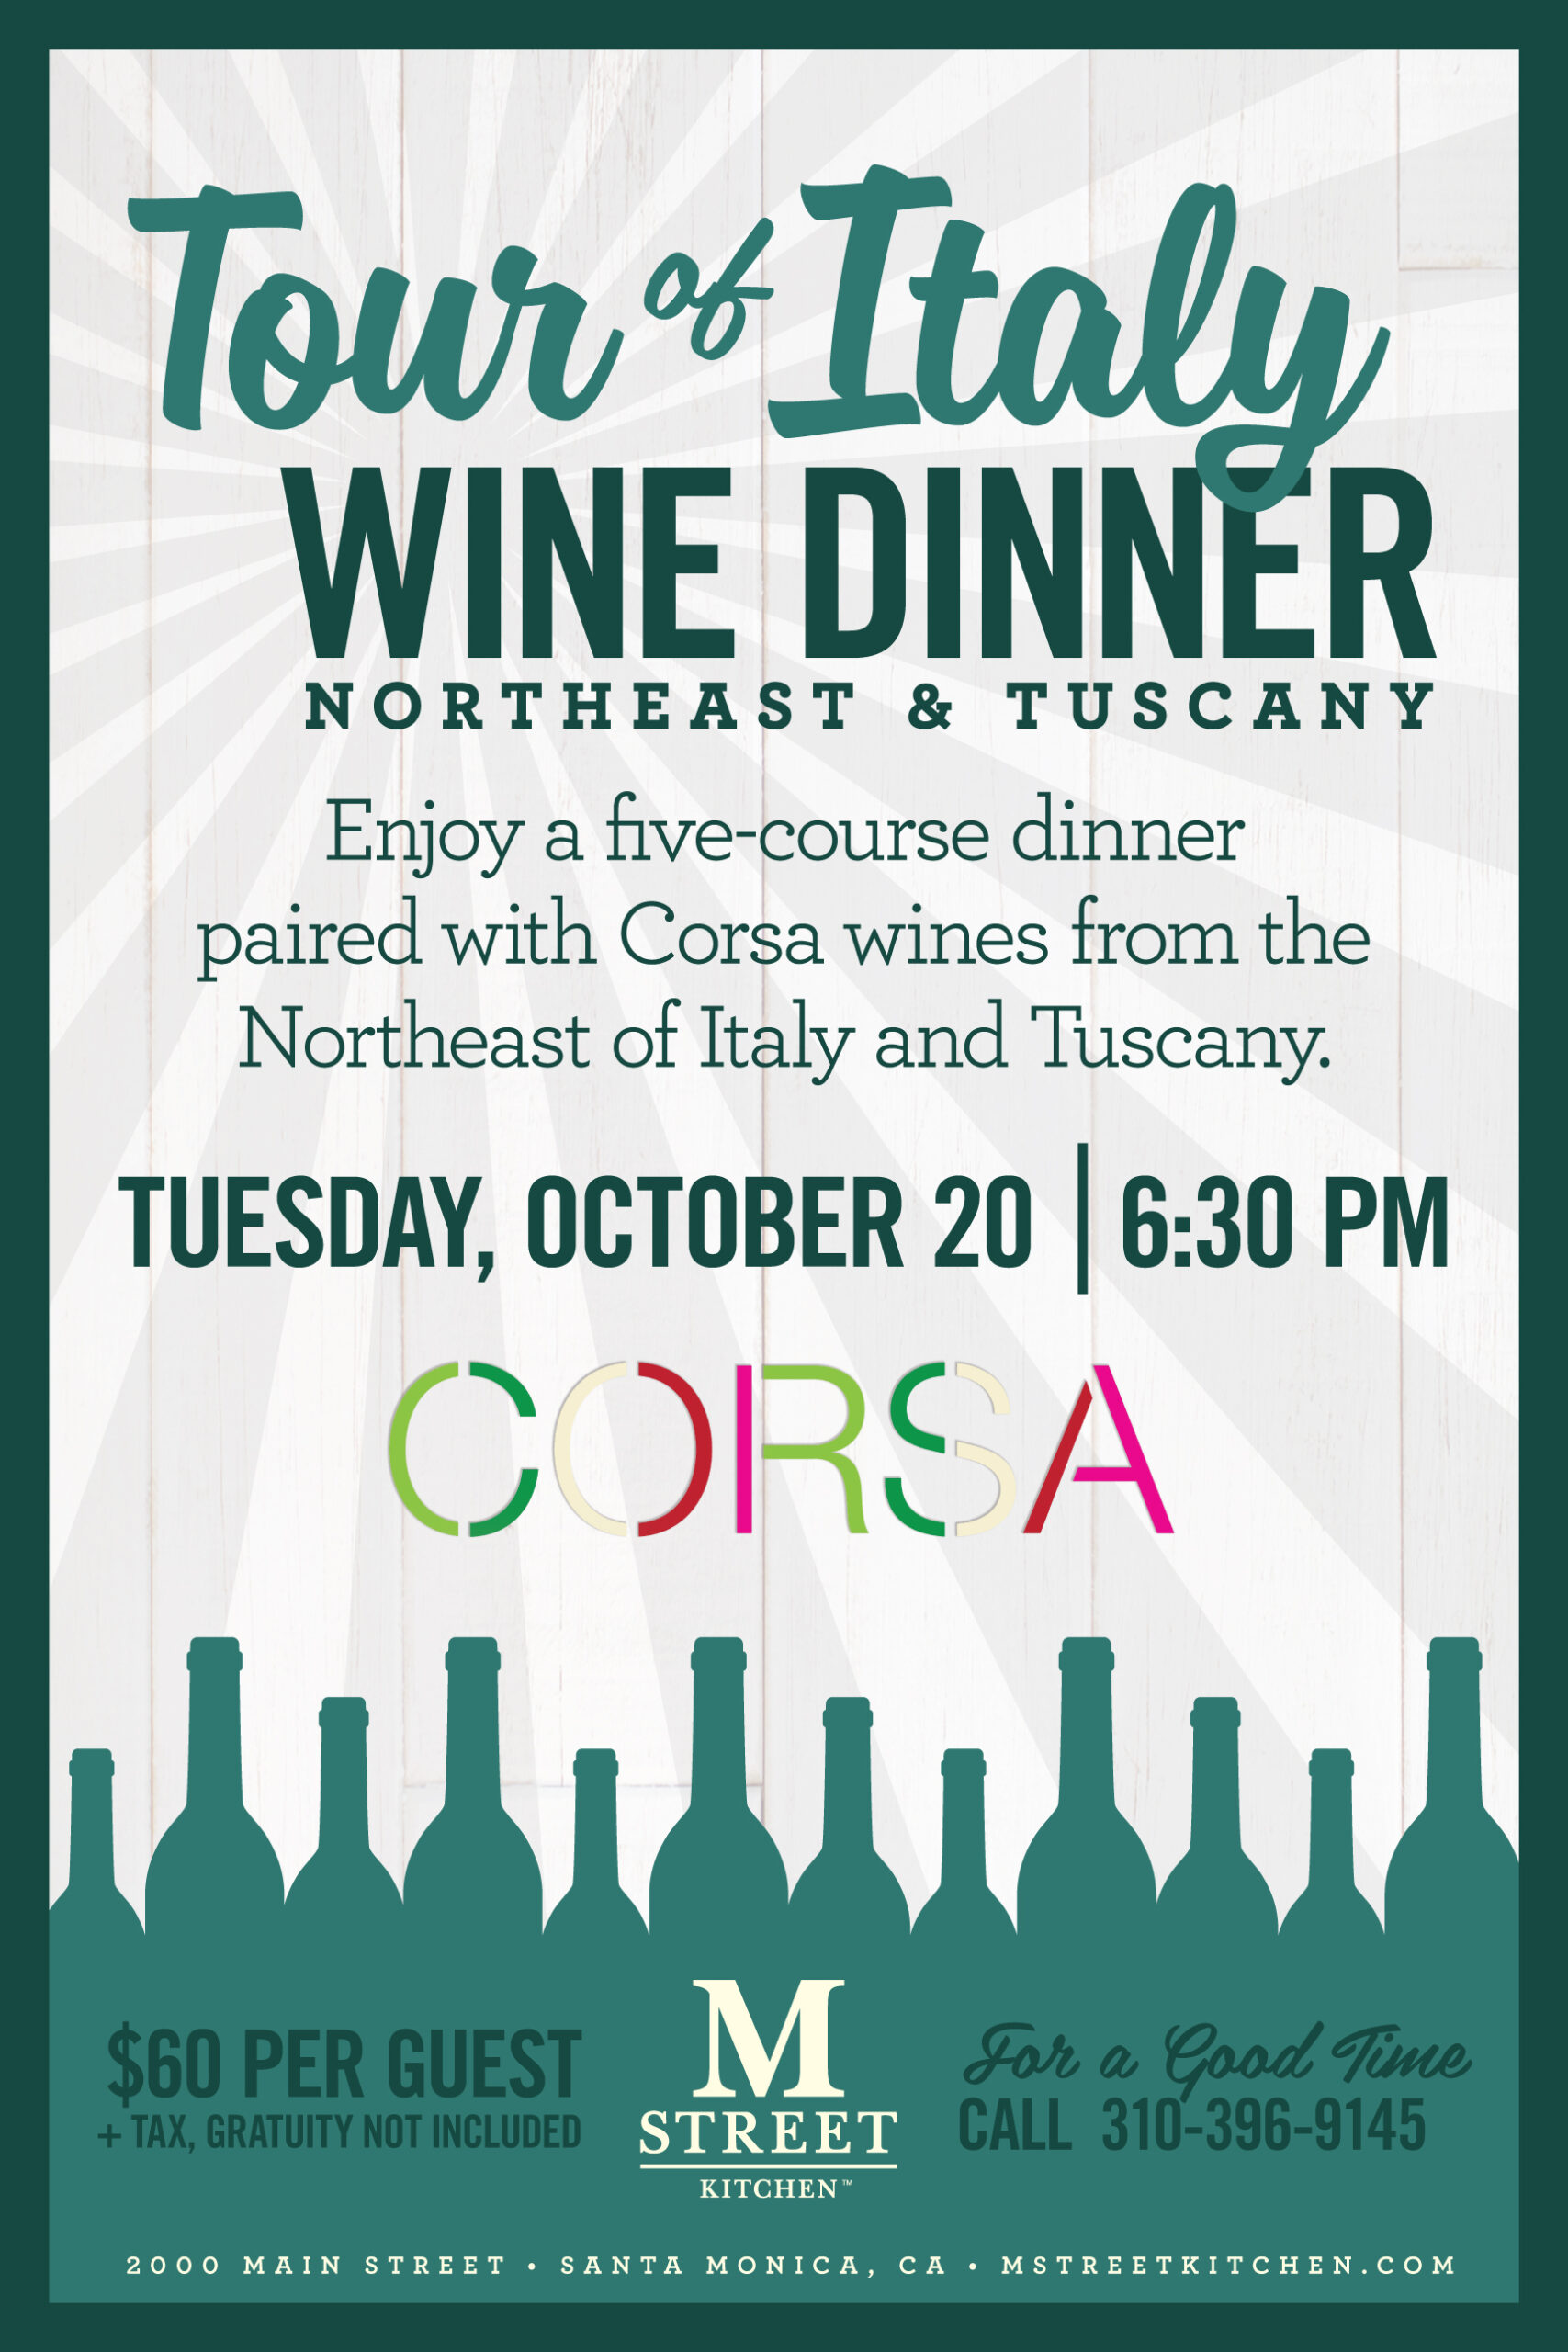 Tour of Italy Wine Dinner: Northeast & Tuscany